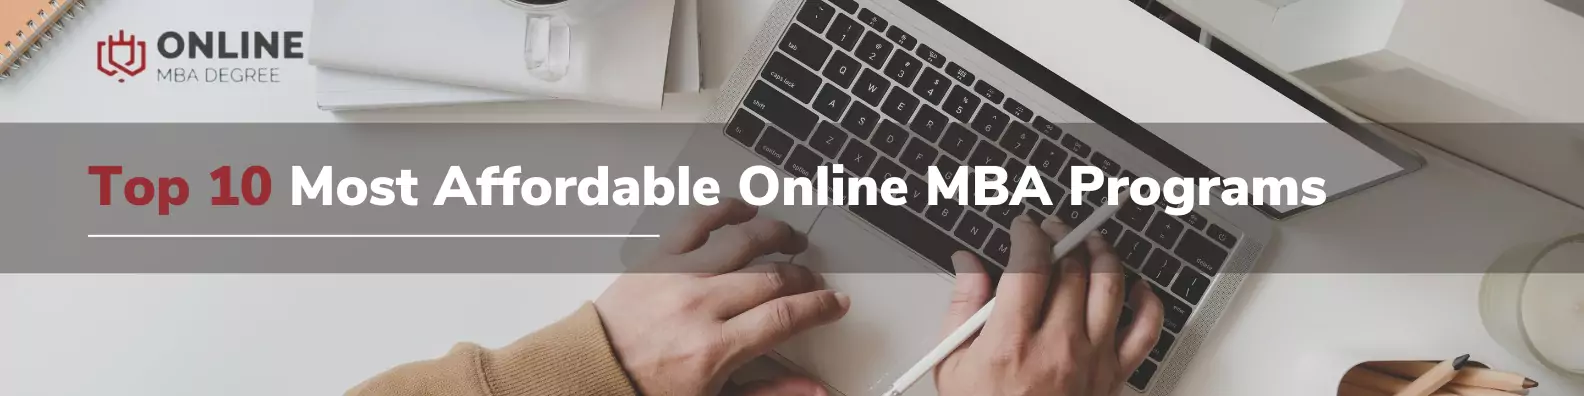 Top 10 Most Affordable Online MBA